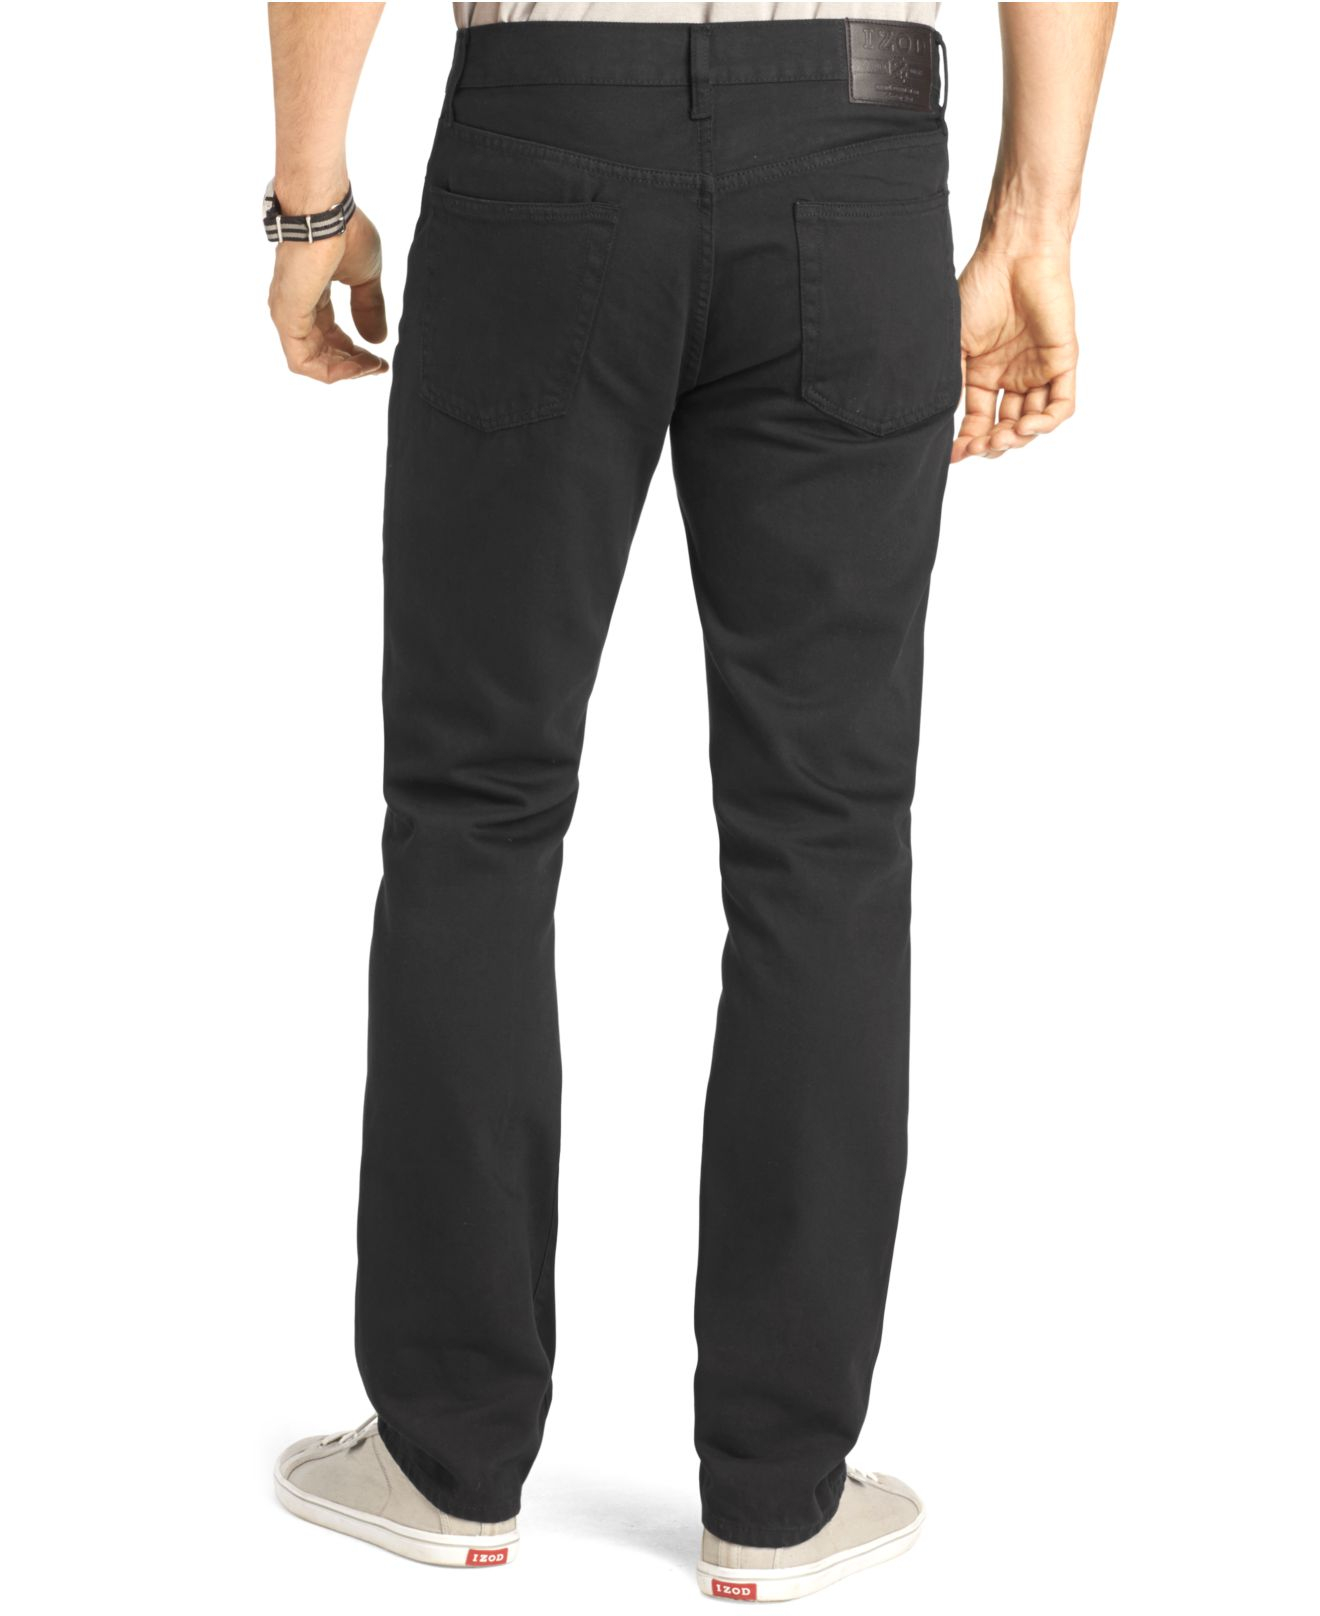 Lyst - Izod Relaxed-Fit Black Jeans in Black for Men